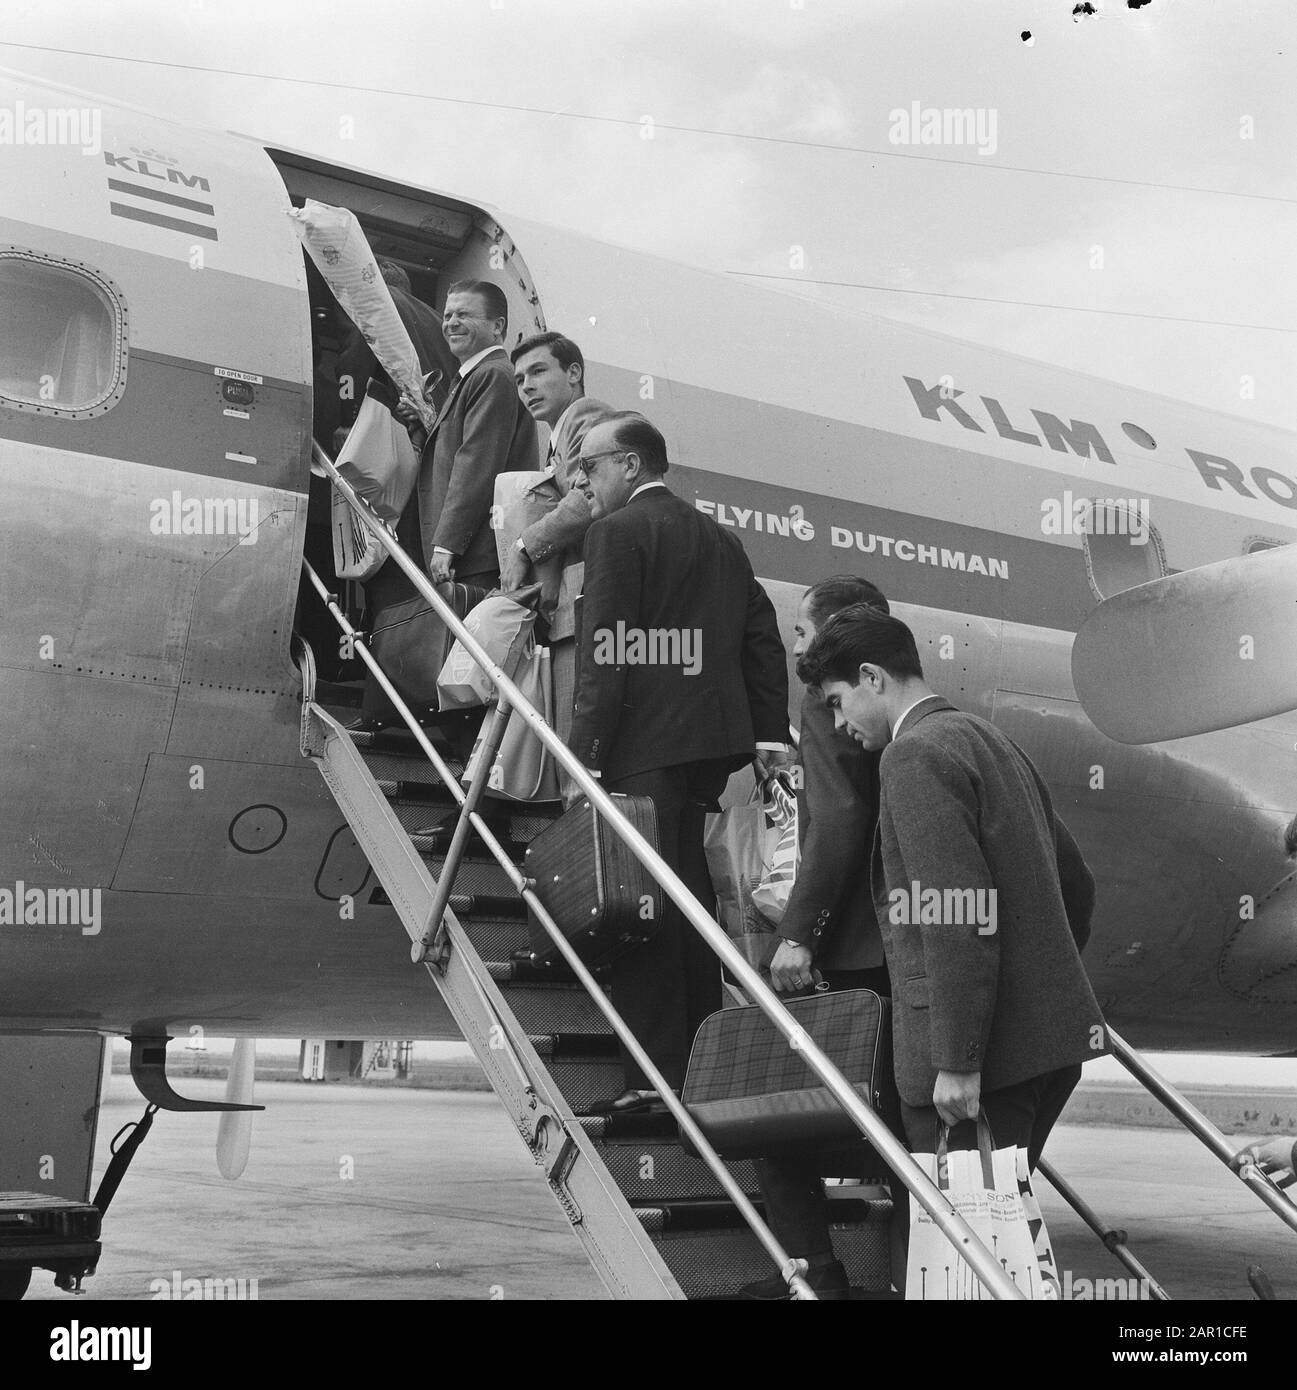 Real Madrid departed from Schiphol, at the top of the stairs Puskas Date: 9 September 1965 Location: Noord-Holland, Schiphol Keywords: sport, departure, aircraft, football Personal name: Puskas , Ferenc Institution name: Real Madrid Stock Photo